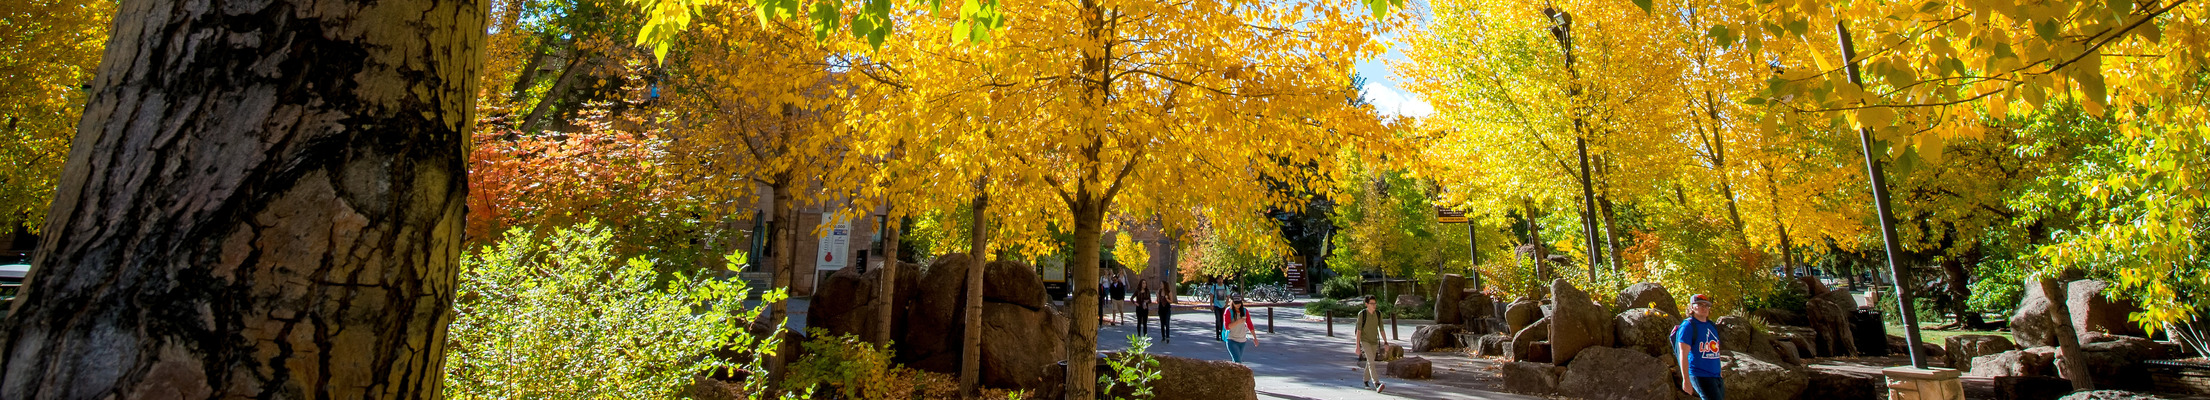 autumn trees with students walking on campus